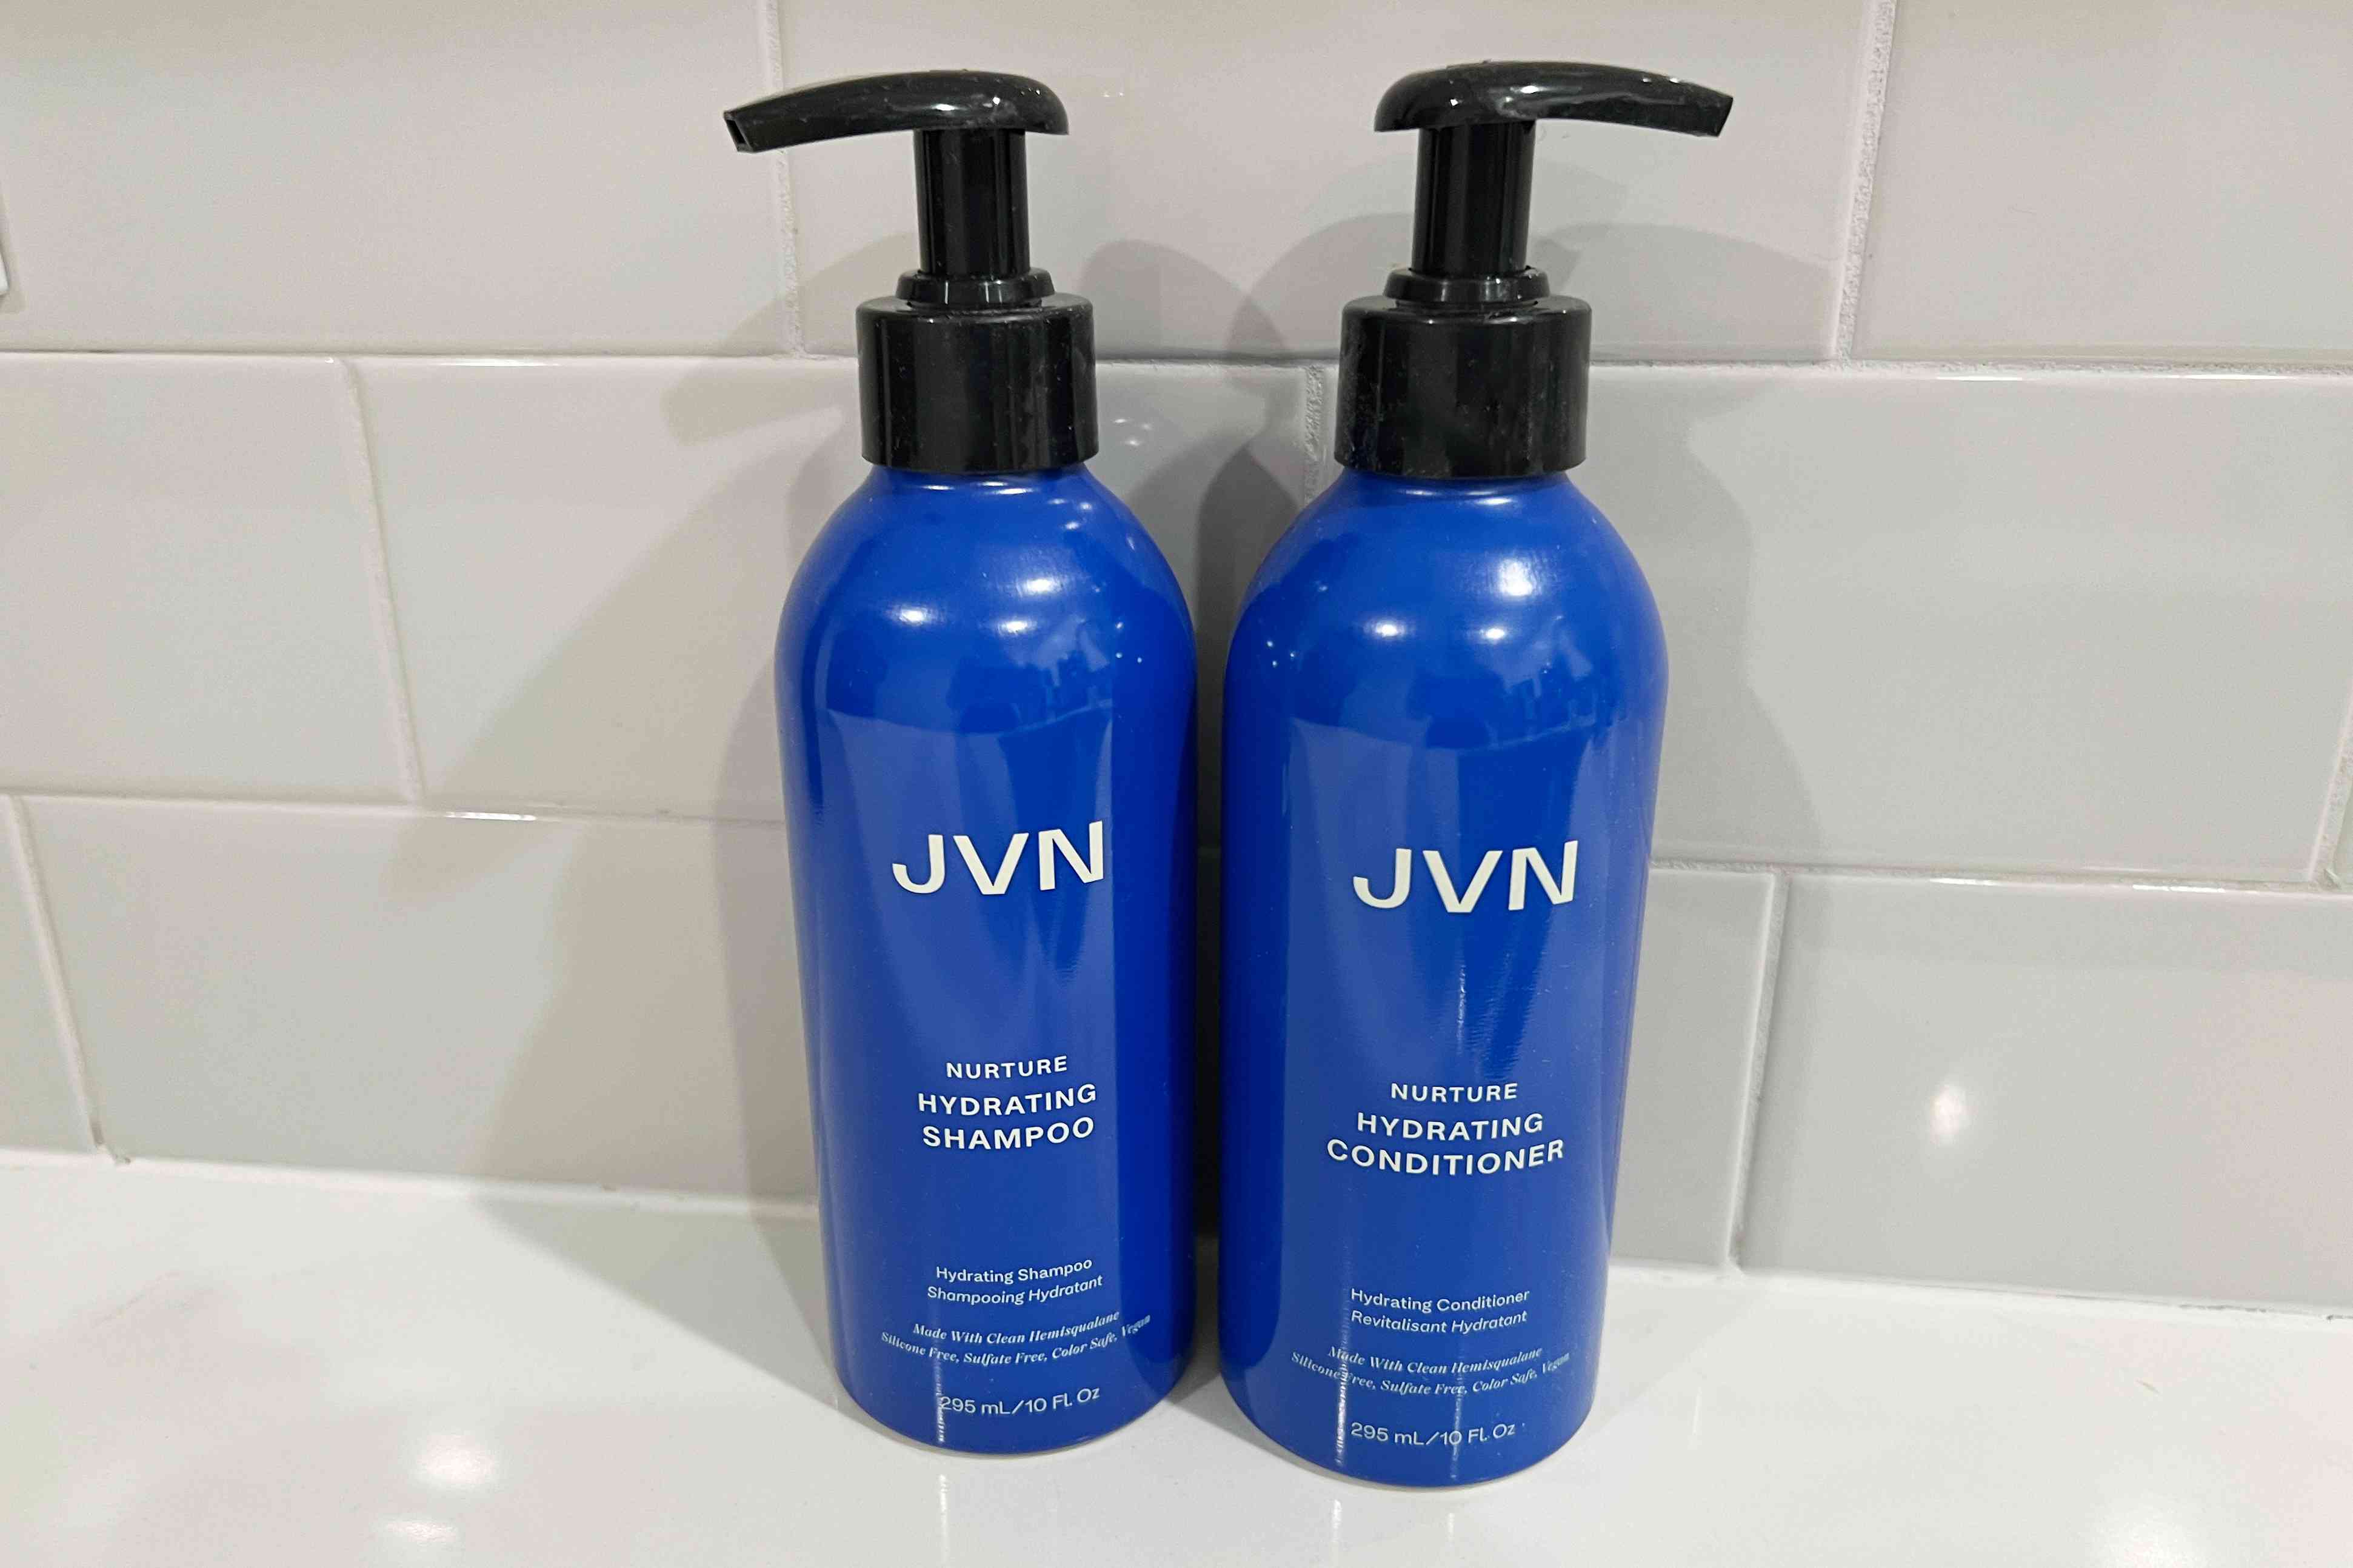 Bottles of JVN Nurture Hydrating Shampoo and Conditioner For Dry Hair